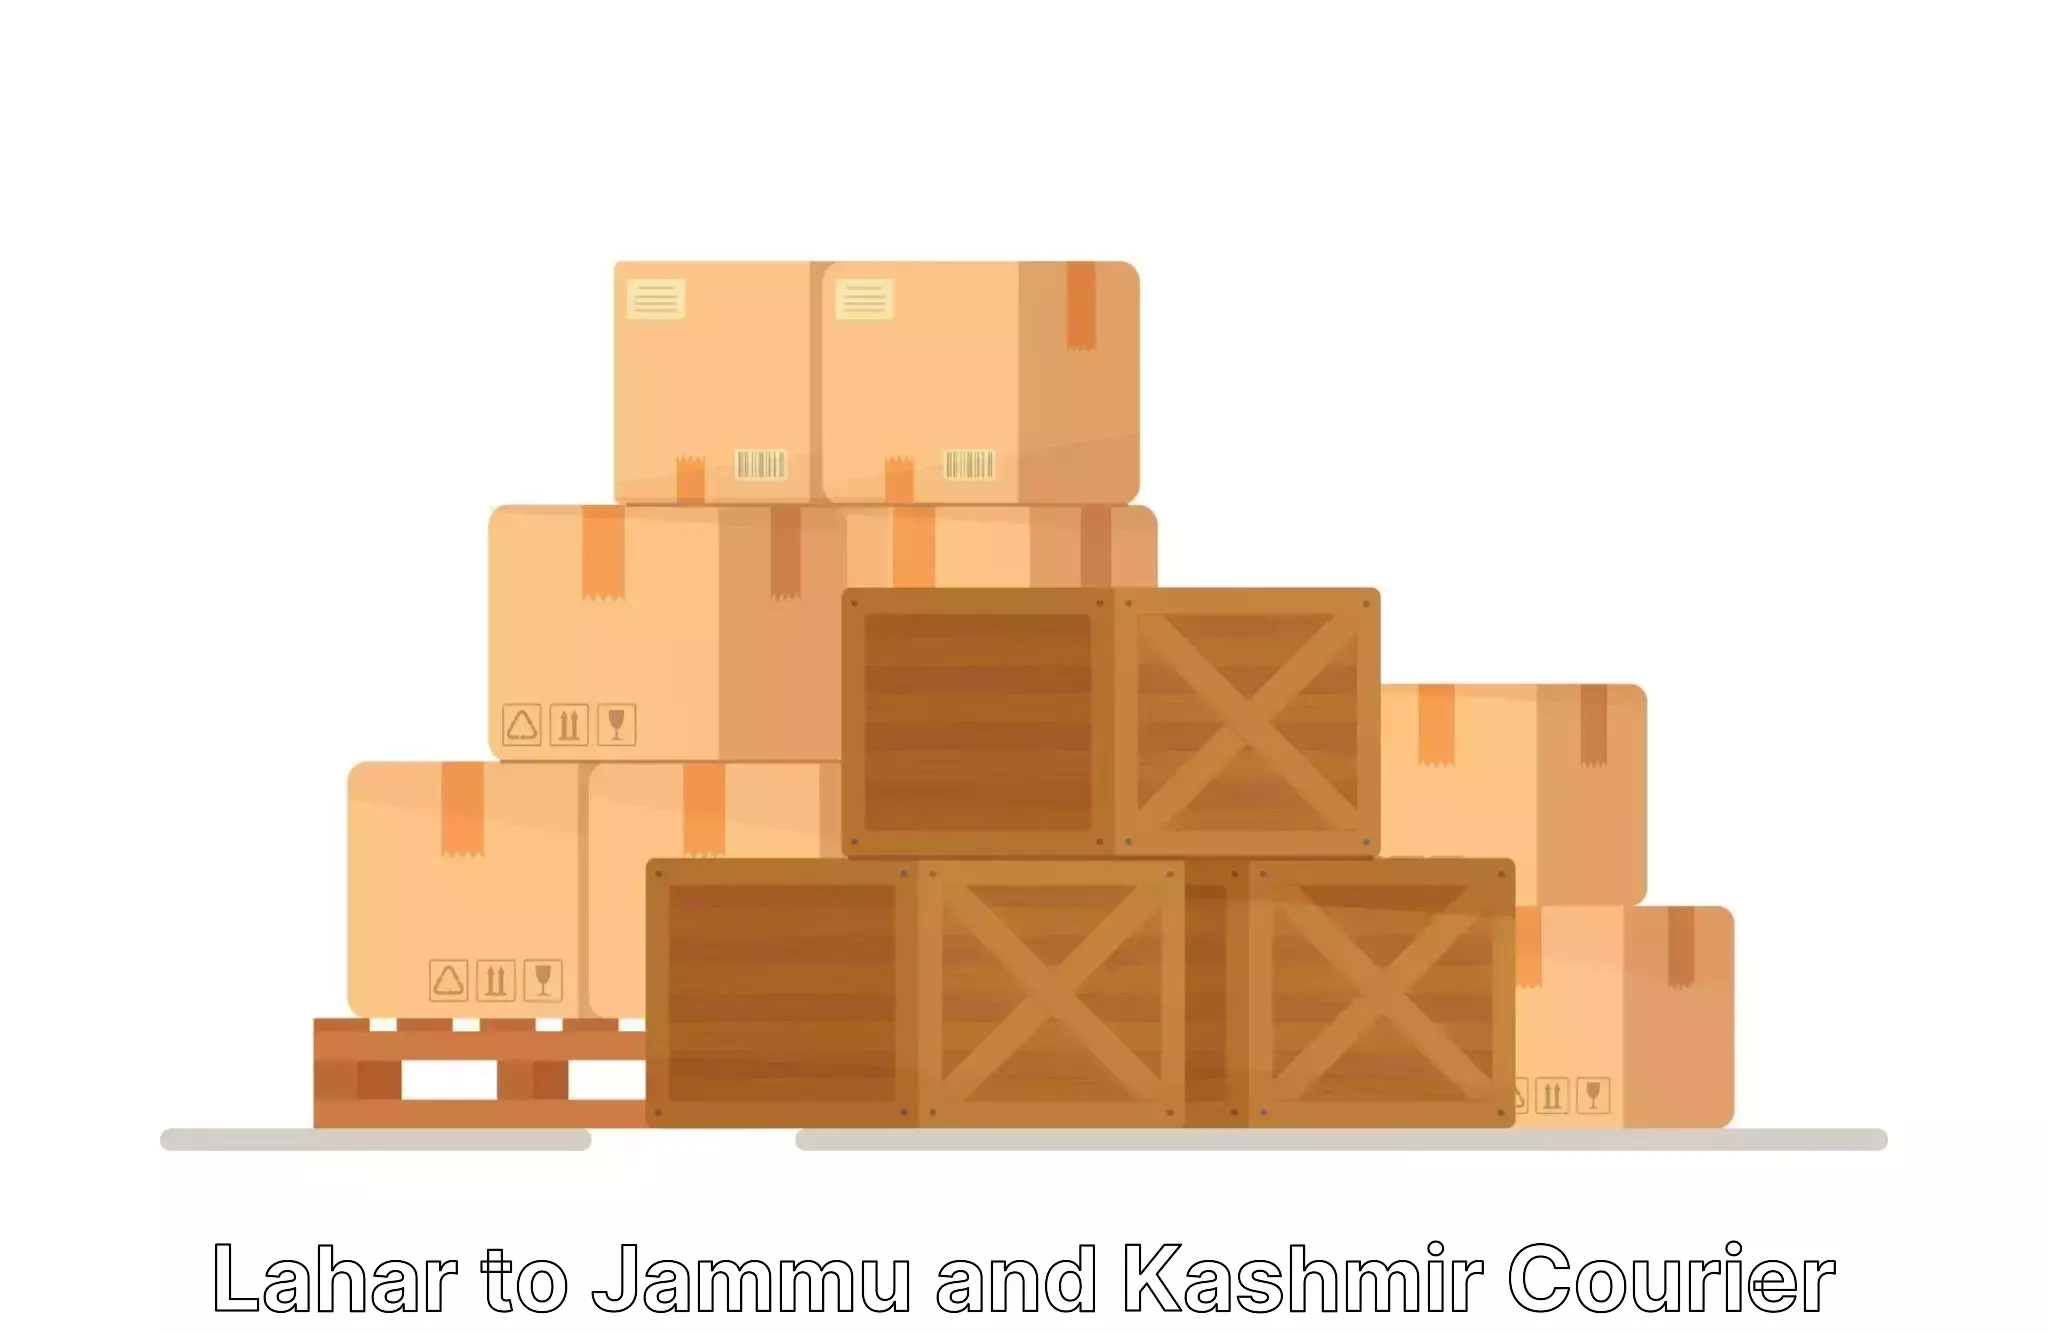 Tailored moving packages Lahar to Srinagar Kashmir